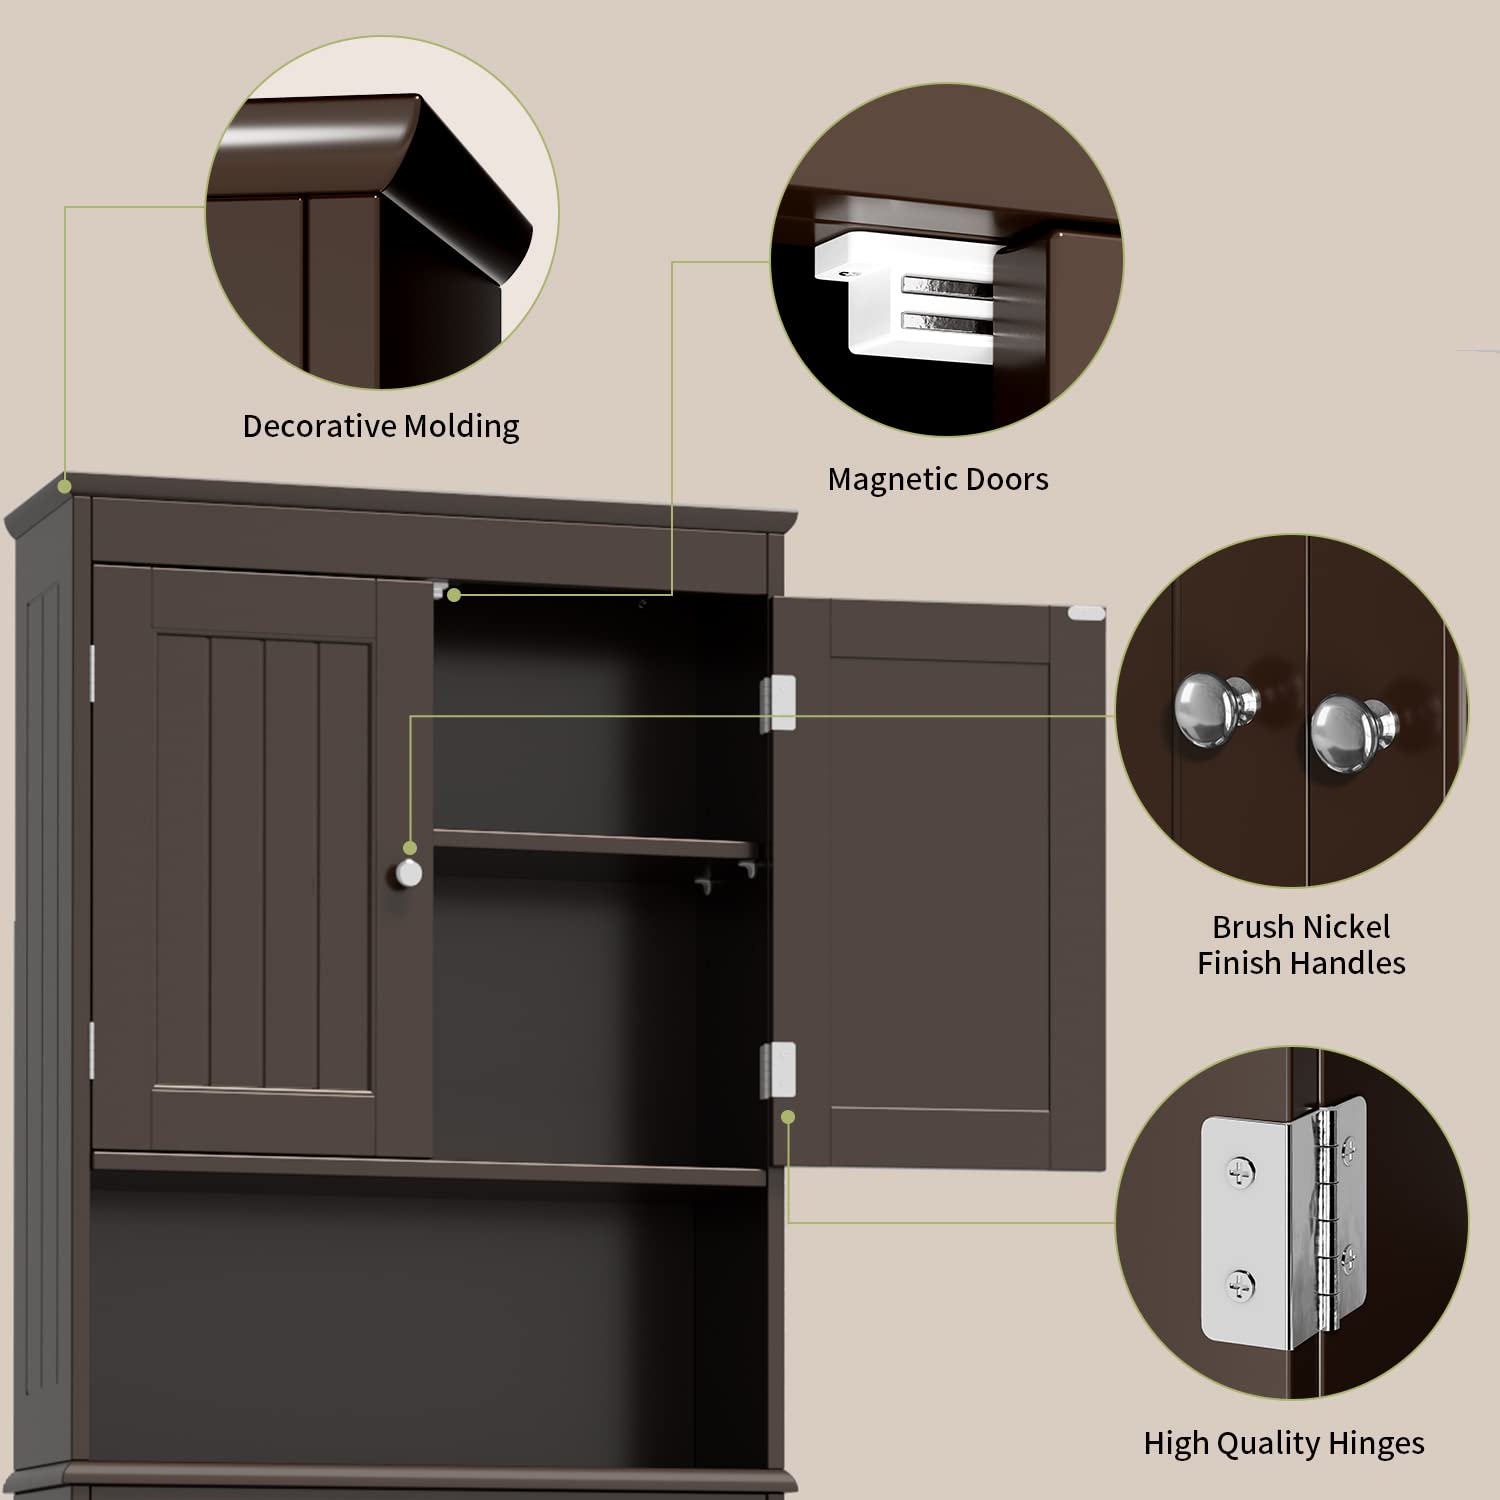 Gizoon AP12 Over The Toilet Storage Cabinet with Adjustable Shelf and Double Doors Wooden Rack